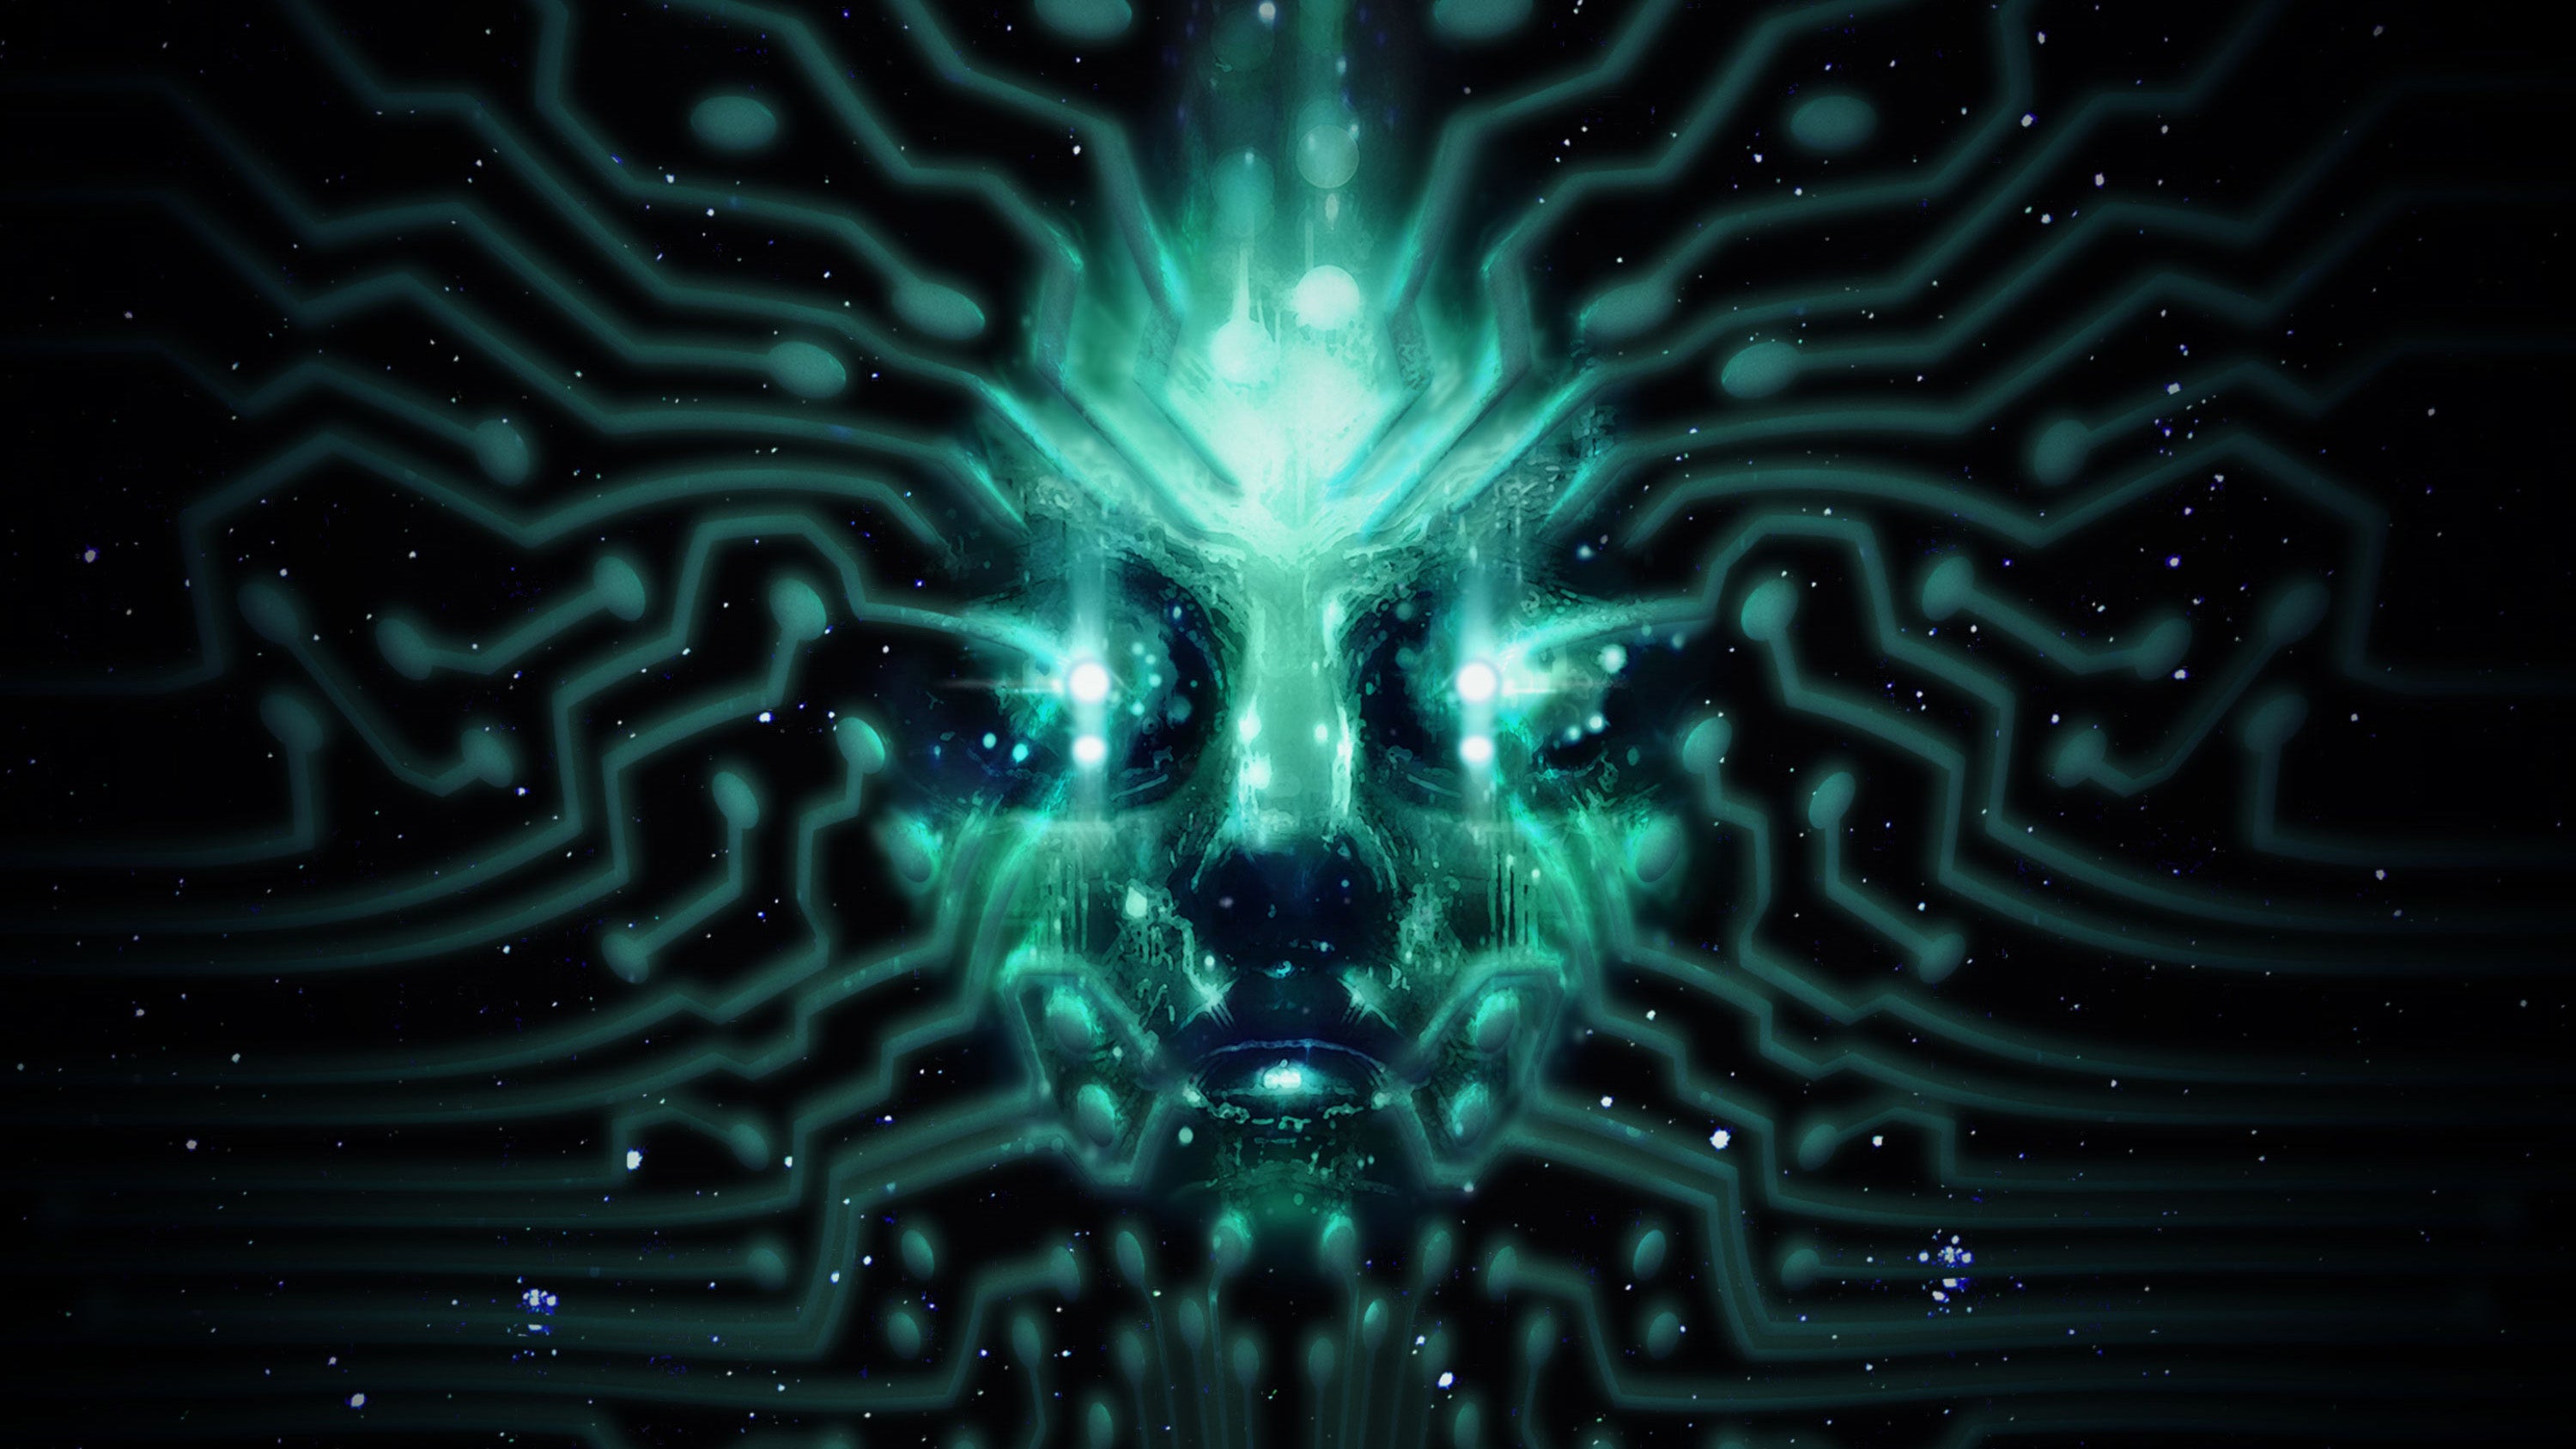 A close-up of Shodan's face - the AI enemy from System Shock. The image is black with green computery signals clustering together to make a glowing, feminine face.